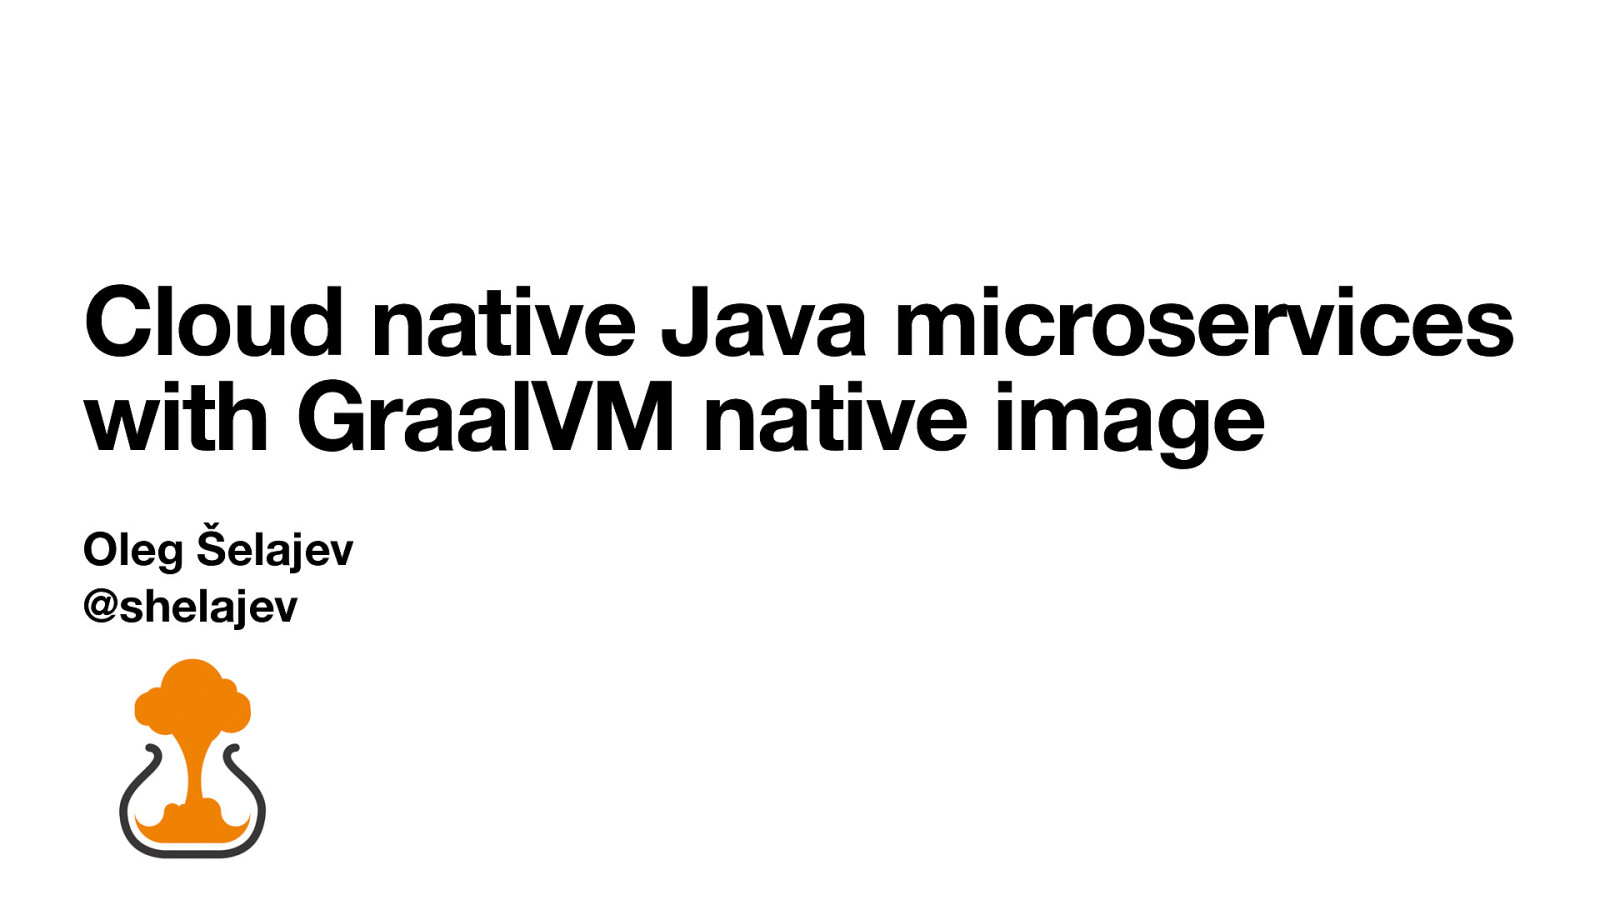 Cloud native Java microservices with GraalVM native image